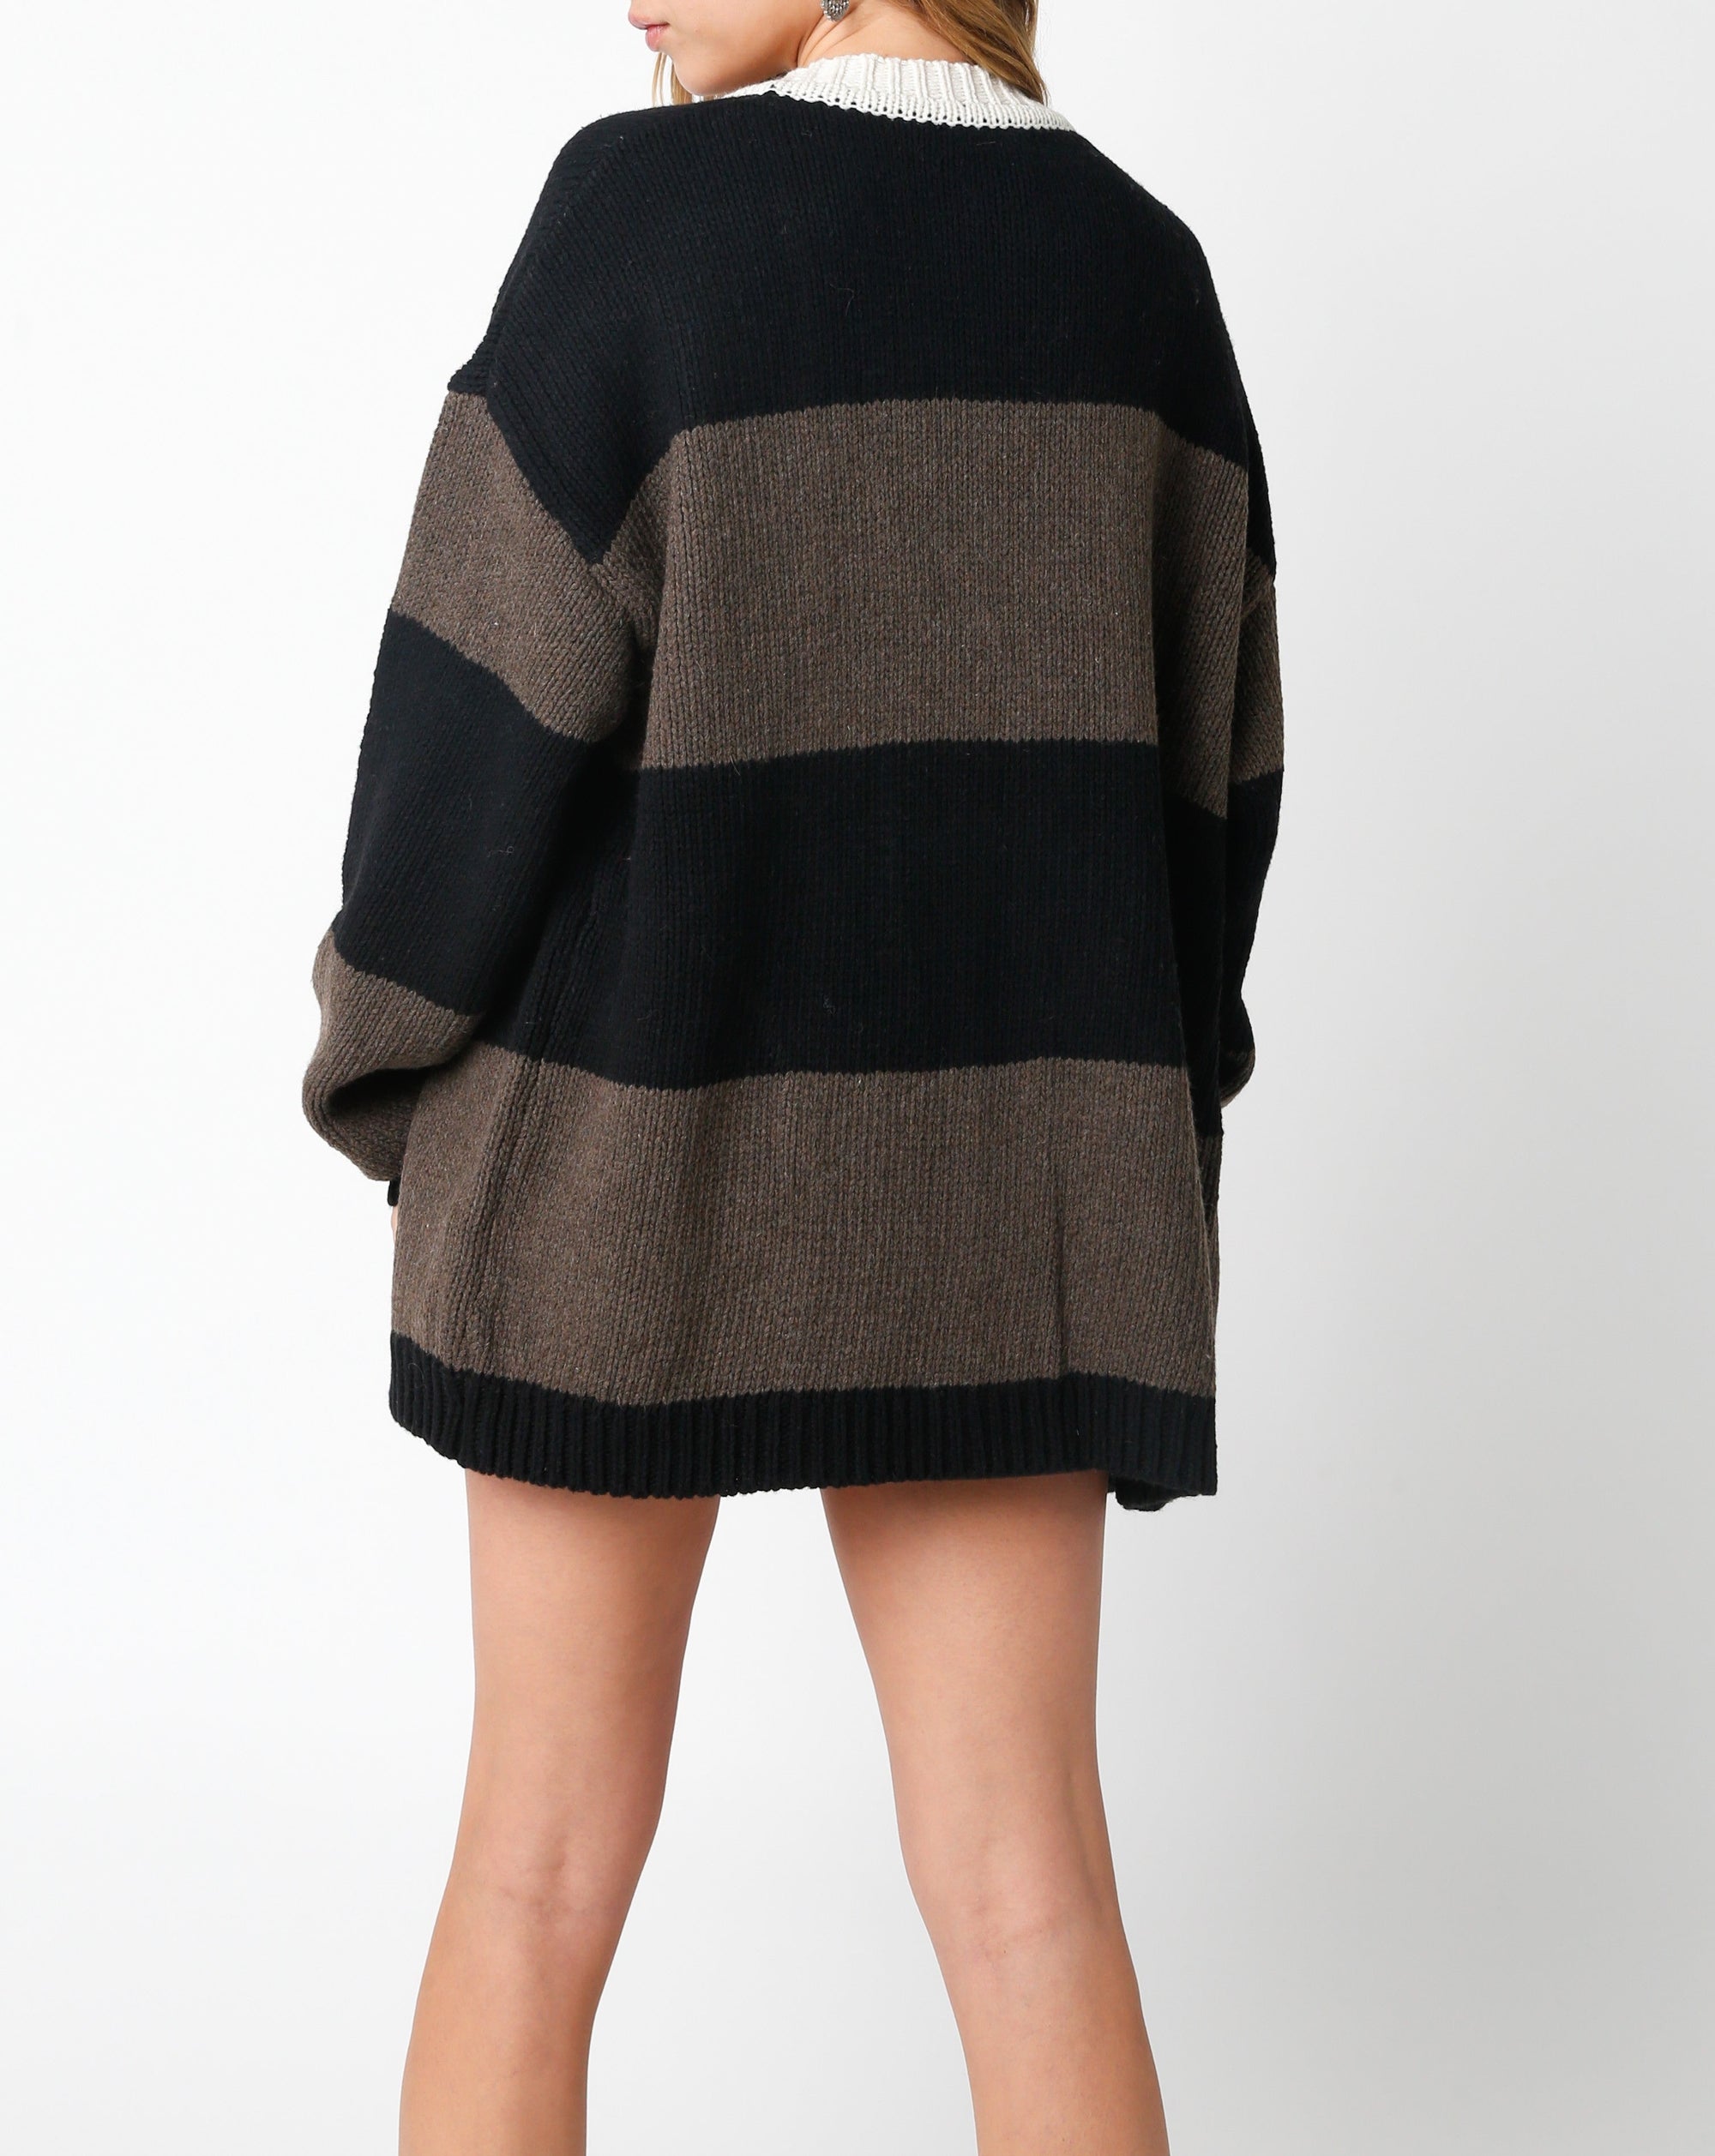 Over-sized Striped Cardigan